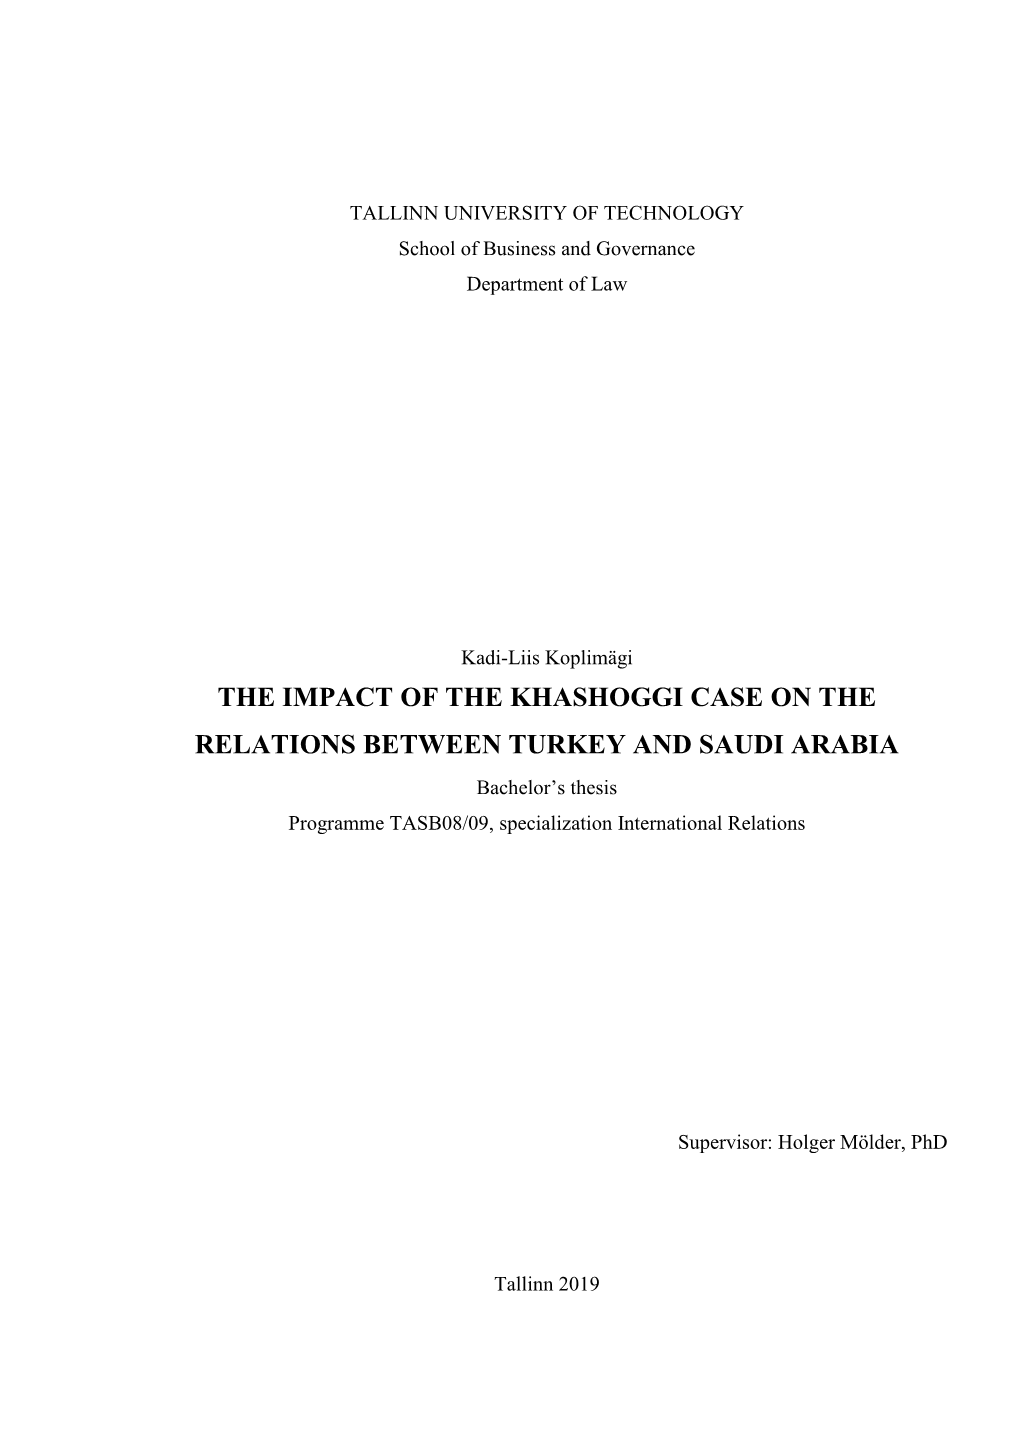 THE IMPACT of the KHASHOGGI CASE on the RELATIONS BETWEEN TURKEY and SAUDI ARABIA Bachelor’S Thesis Programme TASB08/09, Specialization International Relations